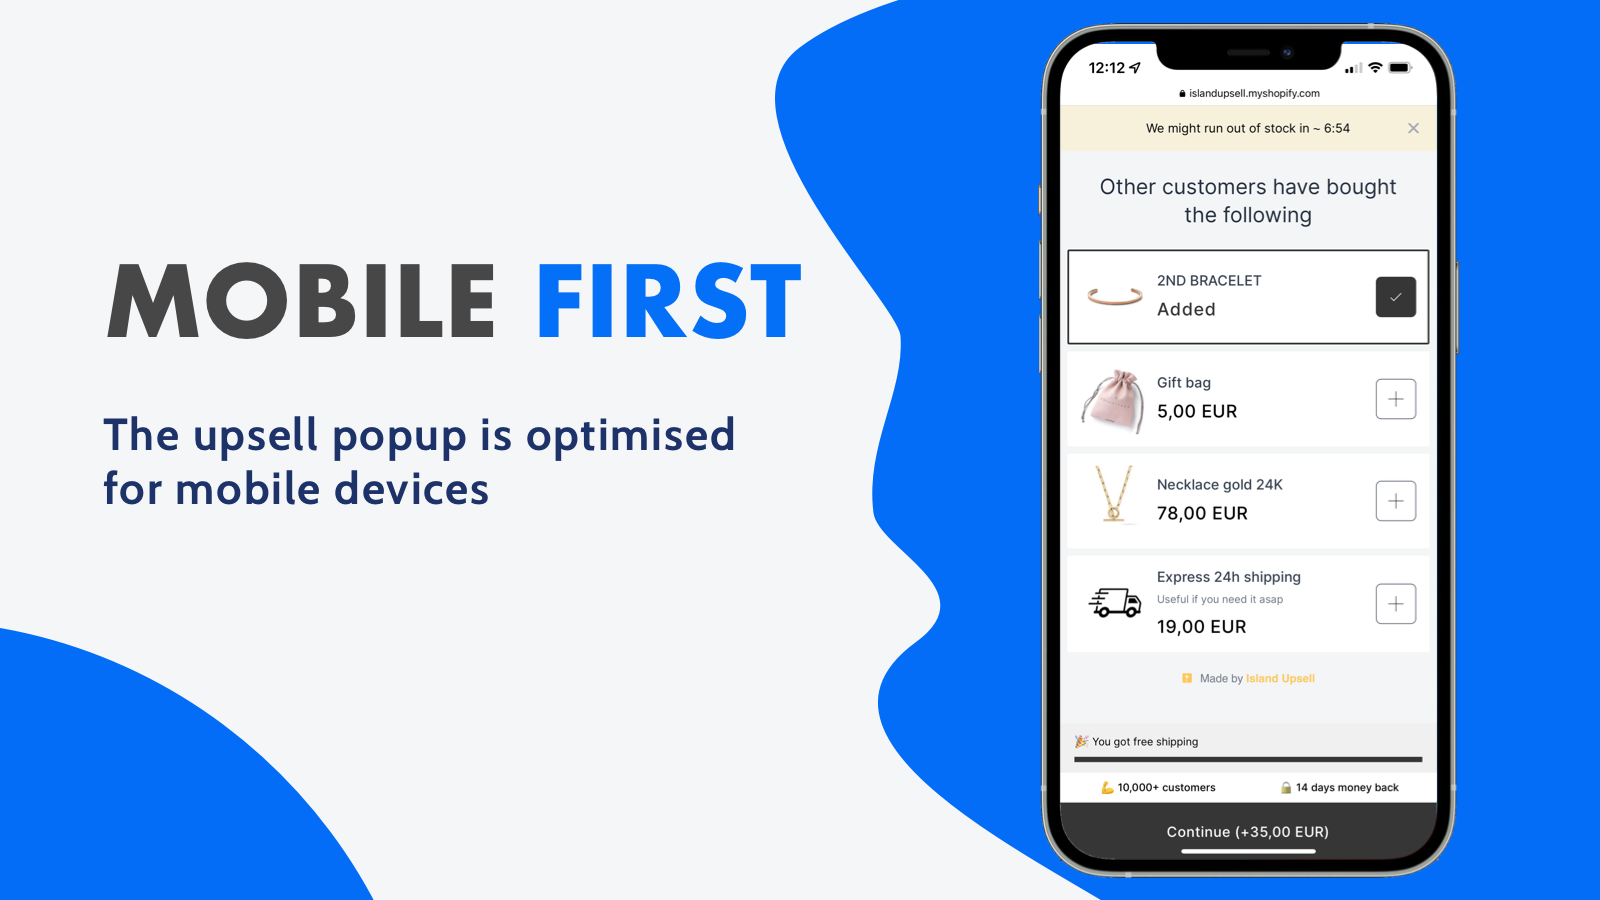 Mobile first for mobile customers